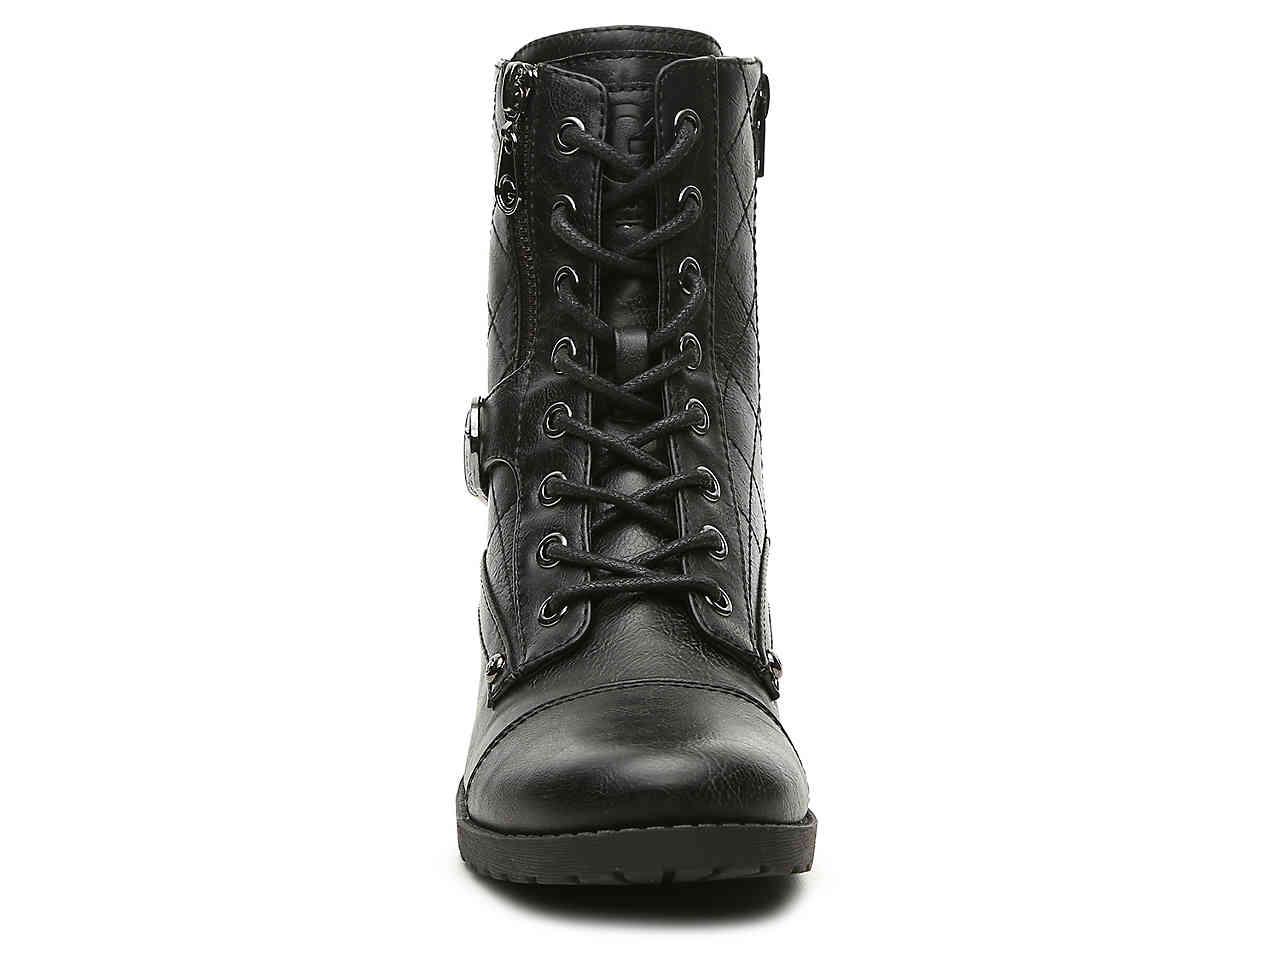 G by Guess Brittain Combat Boot in Black | Lyst